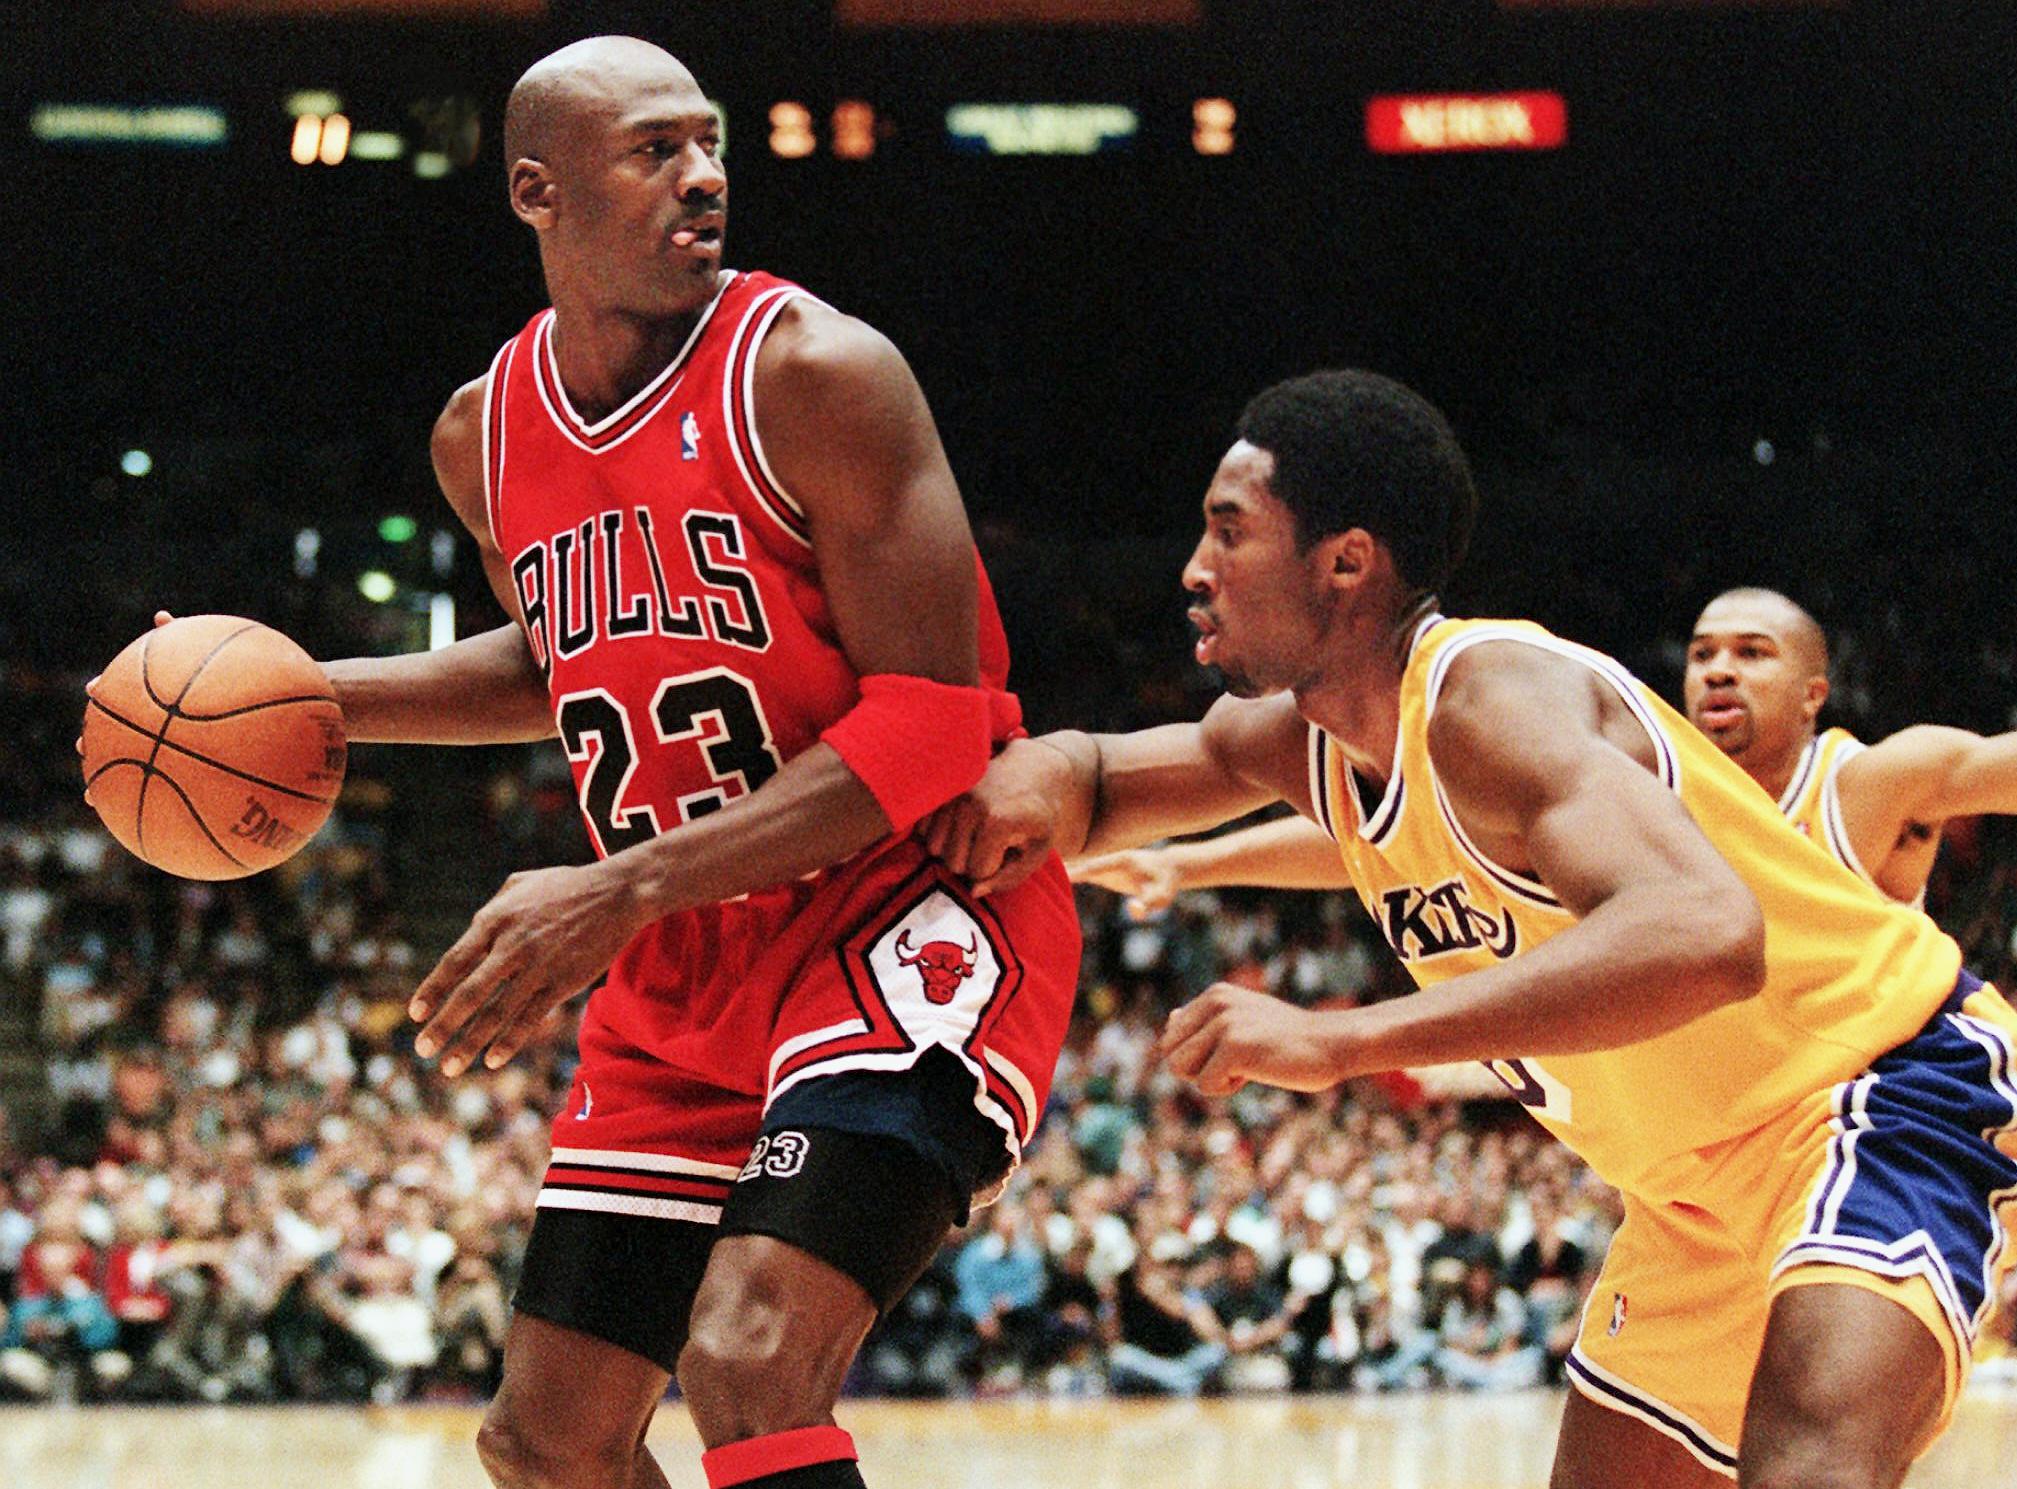 Lakers News: Shaq is right, he and Kobe would beat the 72-win Bulls